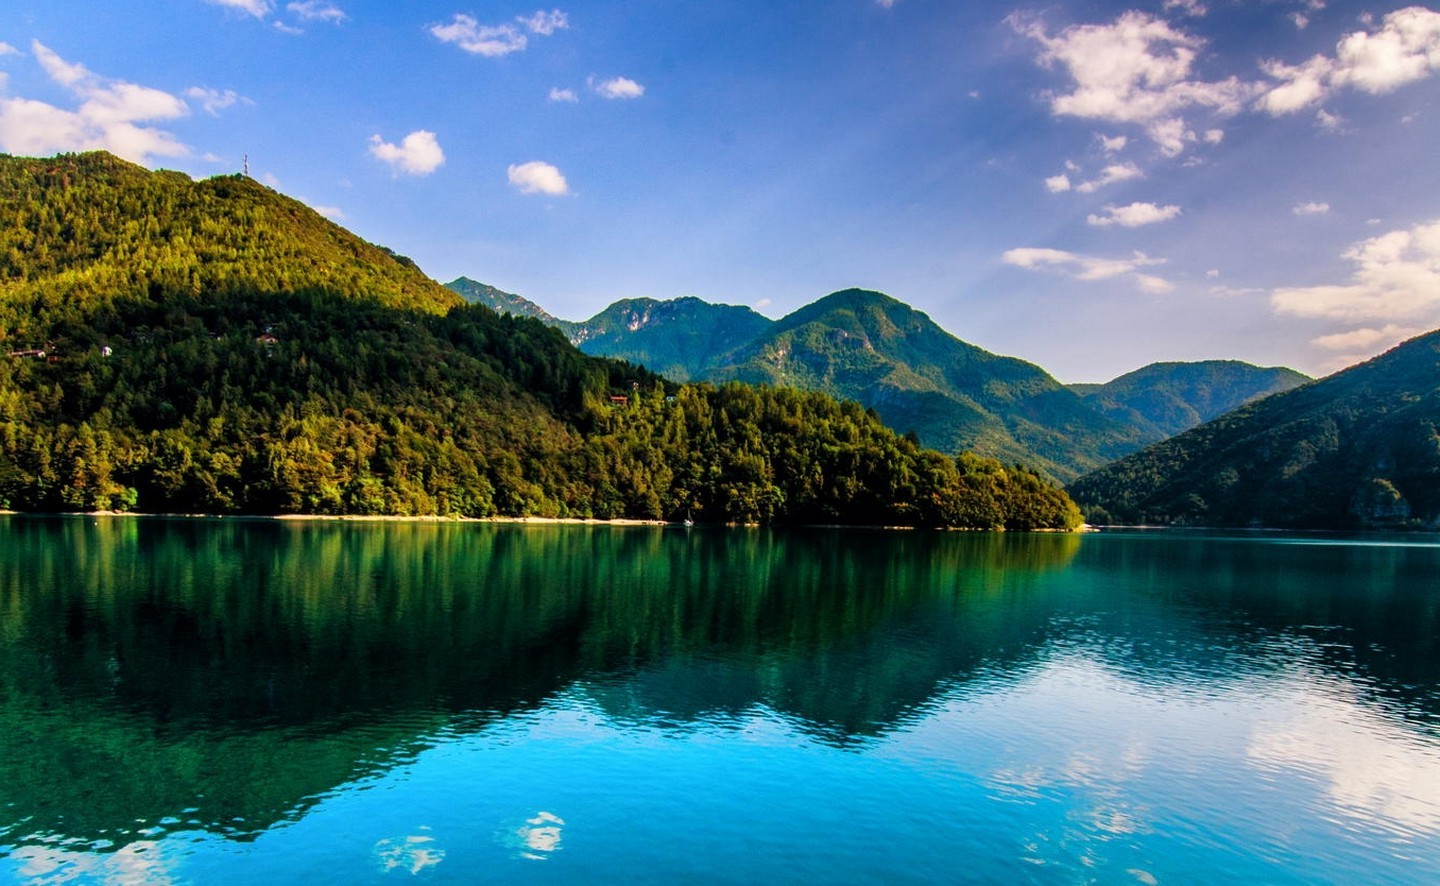 Italy, Lake, Mountain, Forest, Water, Reflection, Summer, Green, Nature, Landscape Wallpaper